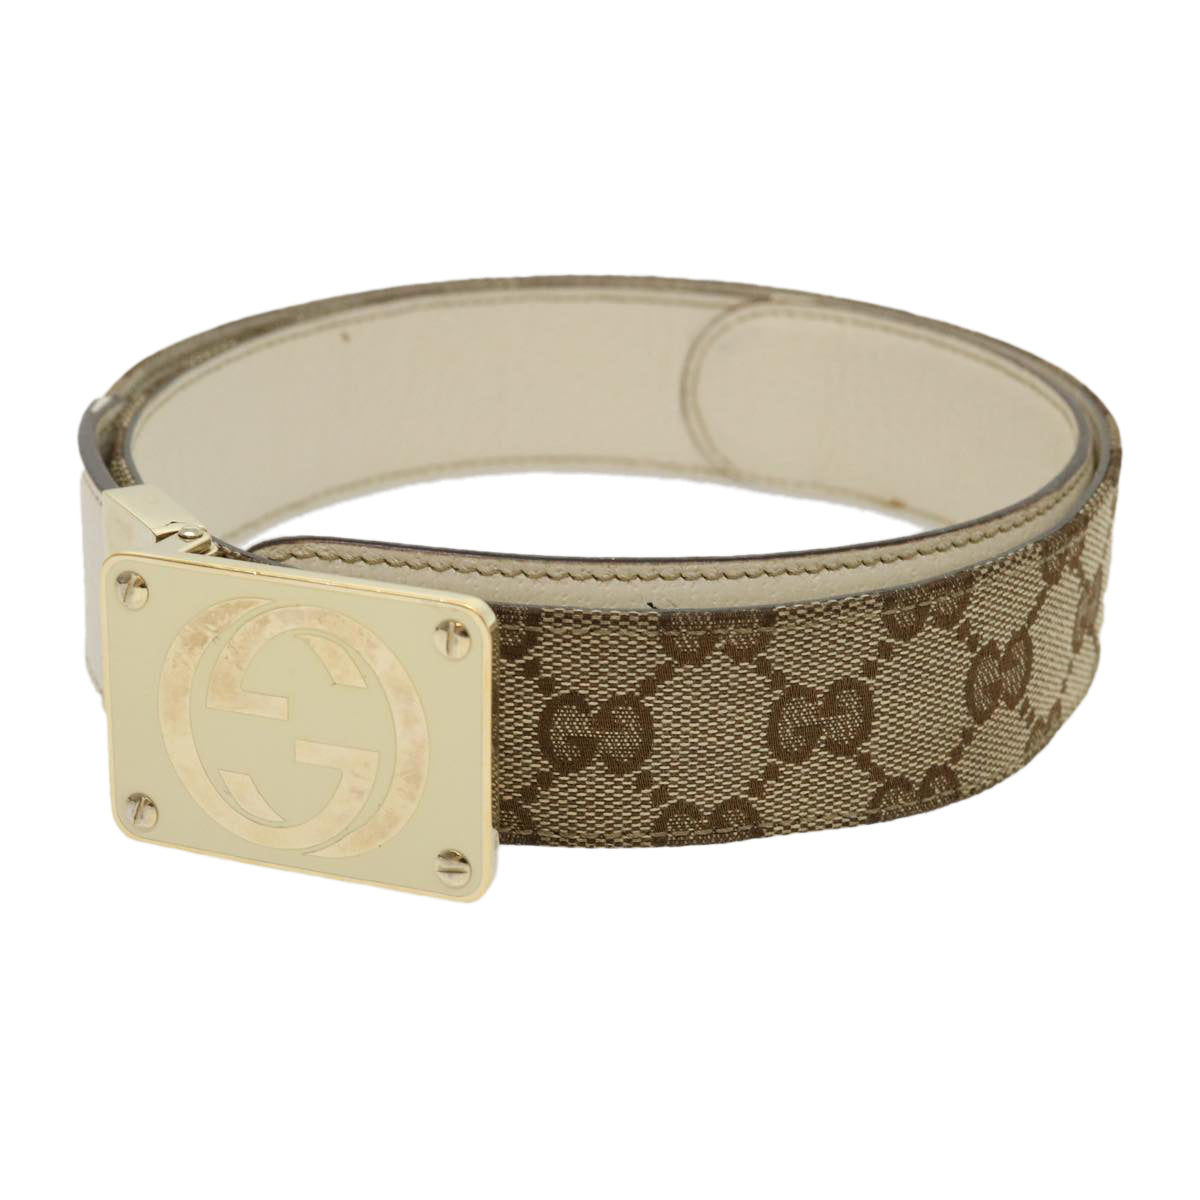 GUCCI GG Canvas Belt Leather Beige White Auth rd2130 - 0